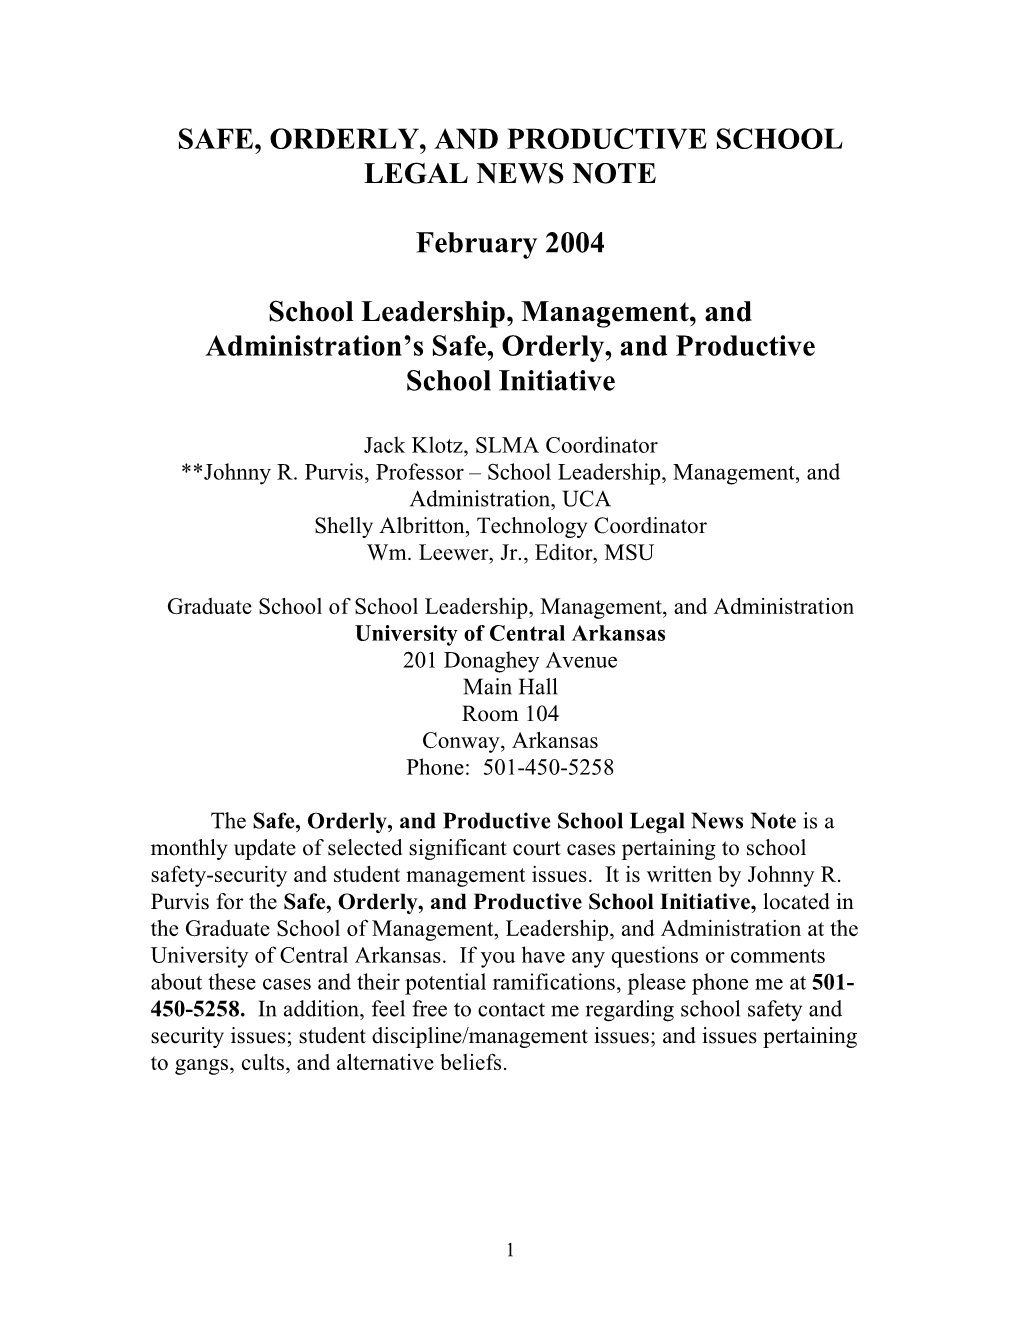 Safe, Orderly, and Productive School Legal News Note